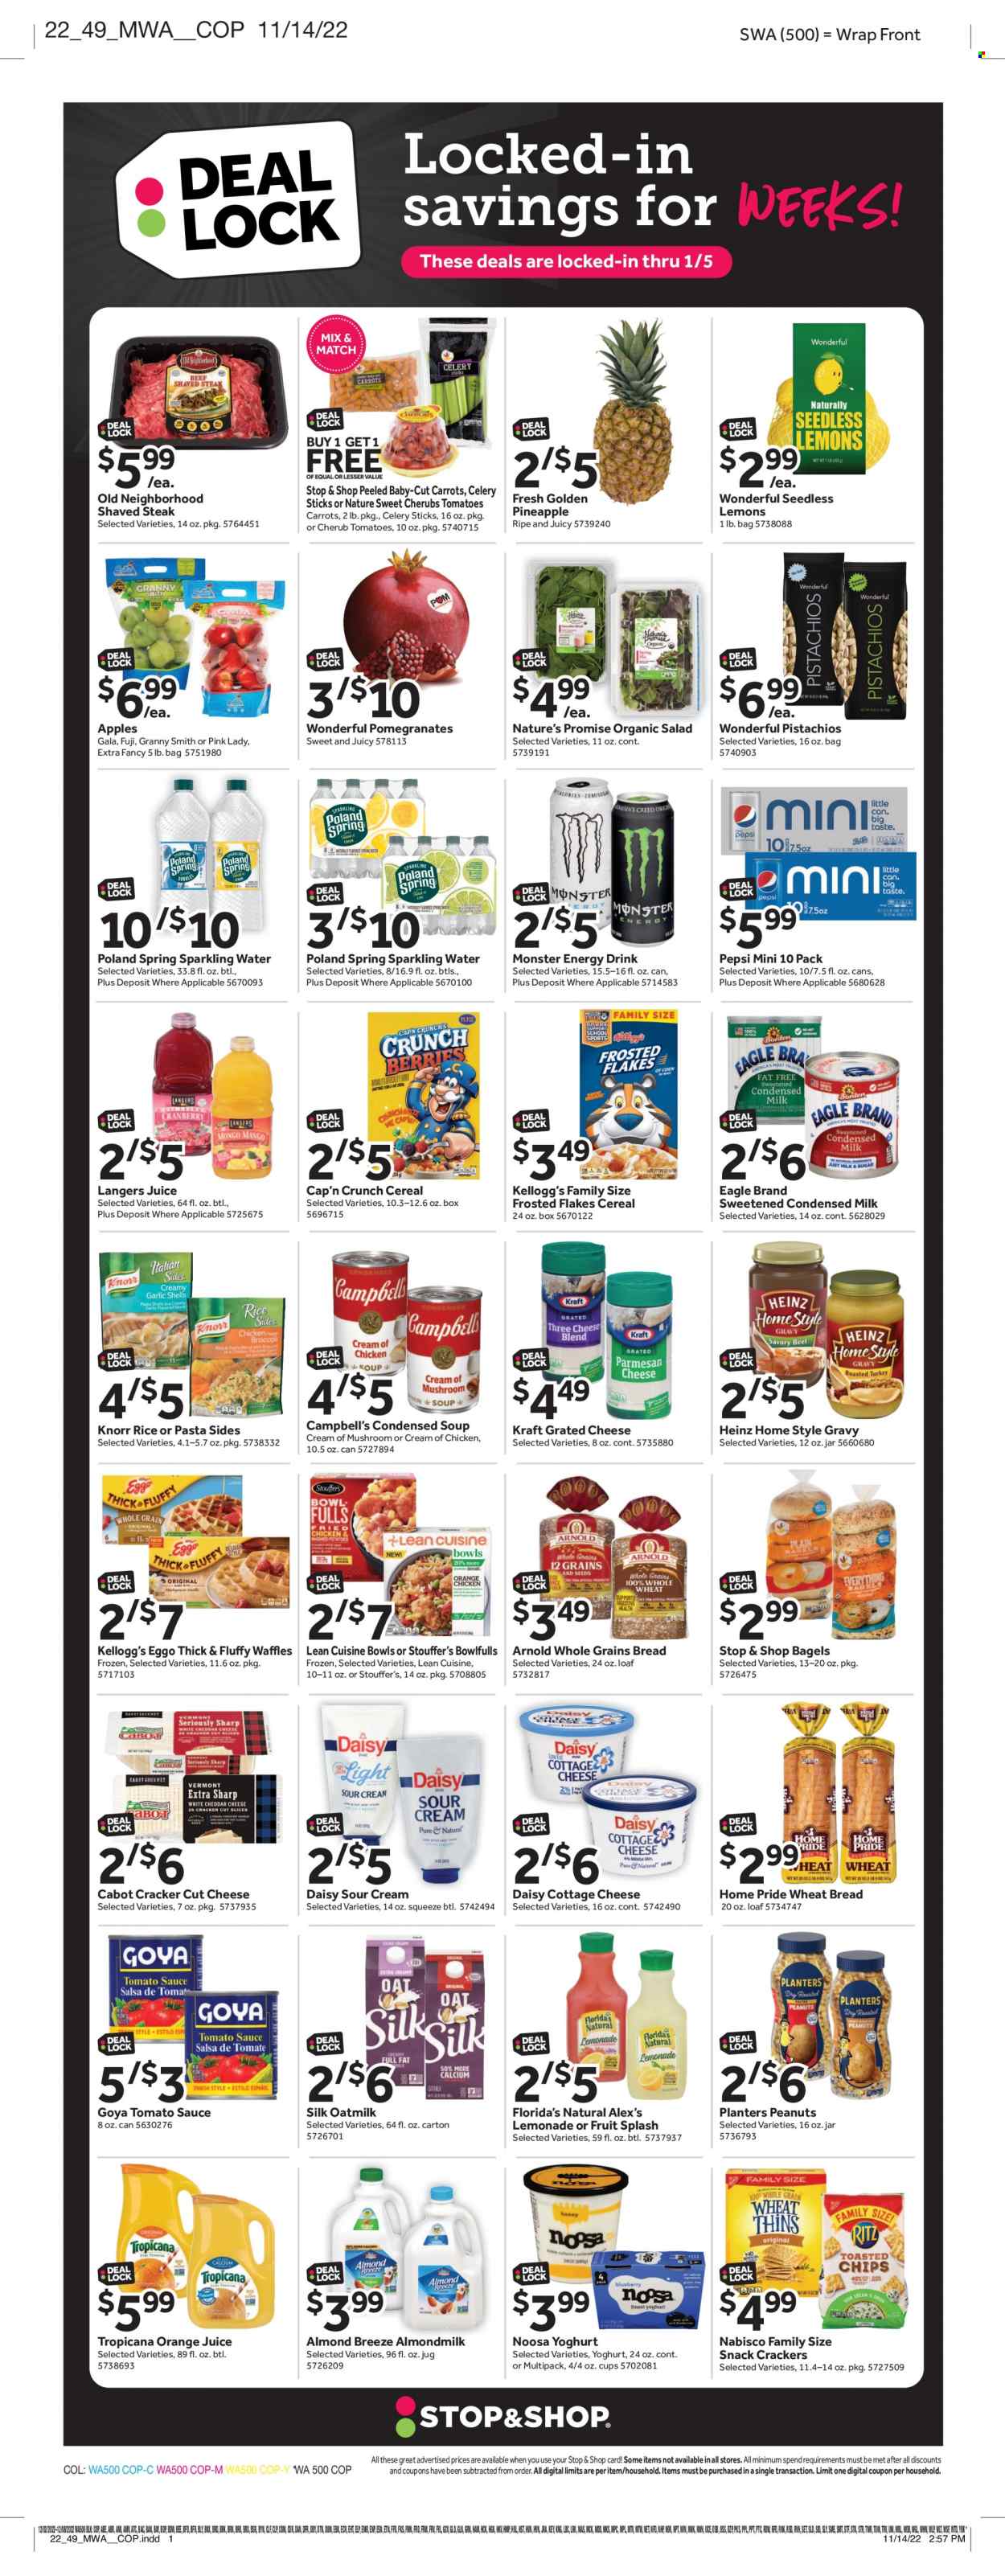 thumbnail - Stop & Shop Flyer - 12/02/2022 - 12/08/2022 - Sales products - bagels, wheat bread, Nature’s Promise, waffles, garlic, salad, apples, Gala, pineapple, Granny Smith, Pink Lady, steak, Campbell's, mushroom soup, condensed soup, soup, Knorr, sauce, instant soup, Lean Cuisine, pasta sides, Kraft®, ham, cottage cheese, parmesan, cheese, grated cheese, yoghurt, almond milk, milk, condensed milk, Silk, Almond Breeze, oat milk, sour cream, Stouffer's, snack, crackers, Kellogg's, Florida's Natural, RITZ, Thins, celery sticks, oats, tomato sauce, Heinz, Goya, cereals, Cap'n Crunch, Frosted Flakes, salsa, peanuts, pistachios, Planters, lemonade, Pepsi, orange juice, juice, energy drink, Monster, Monster Energy, sparkling water, calcium, pomegranate, lemons. Page 7.